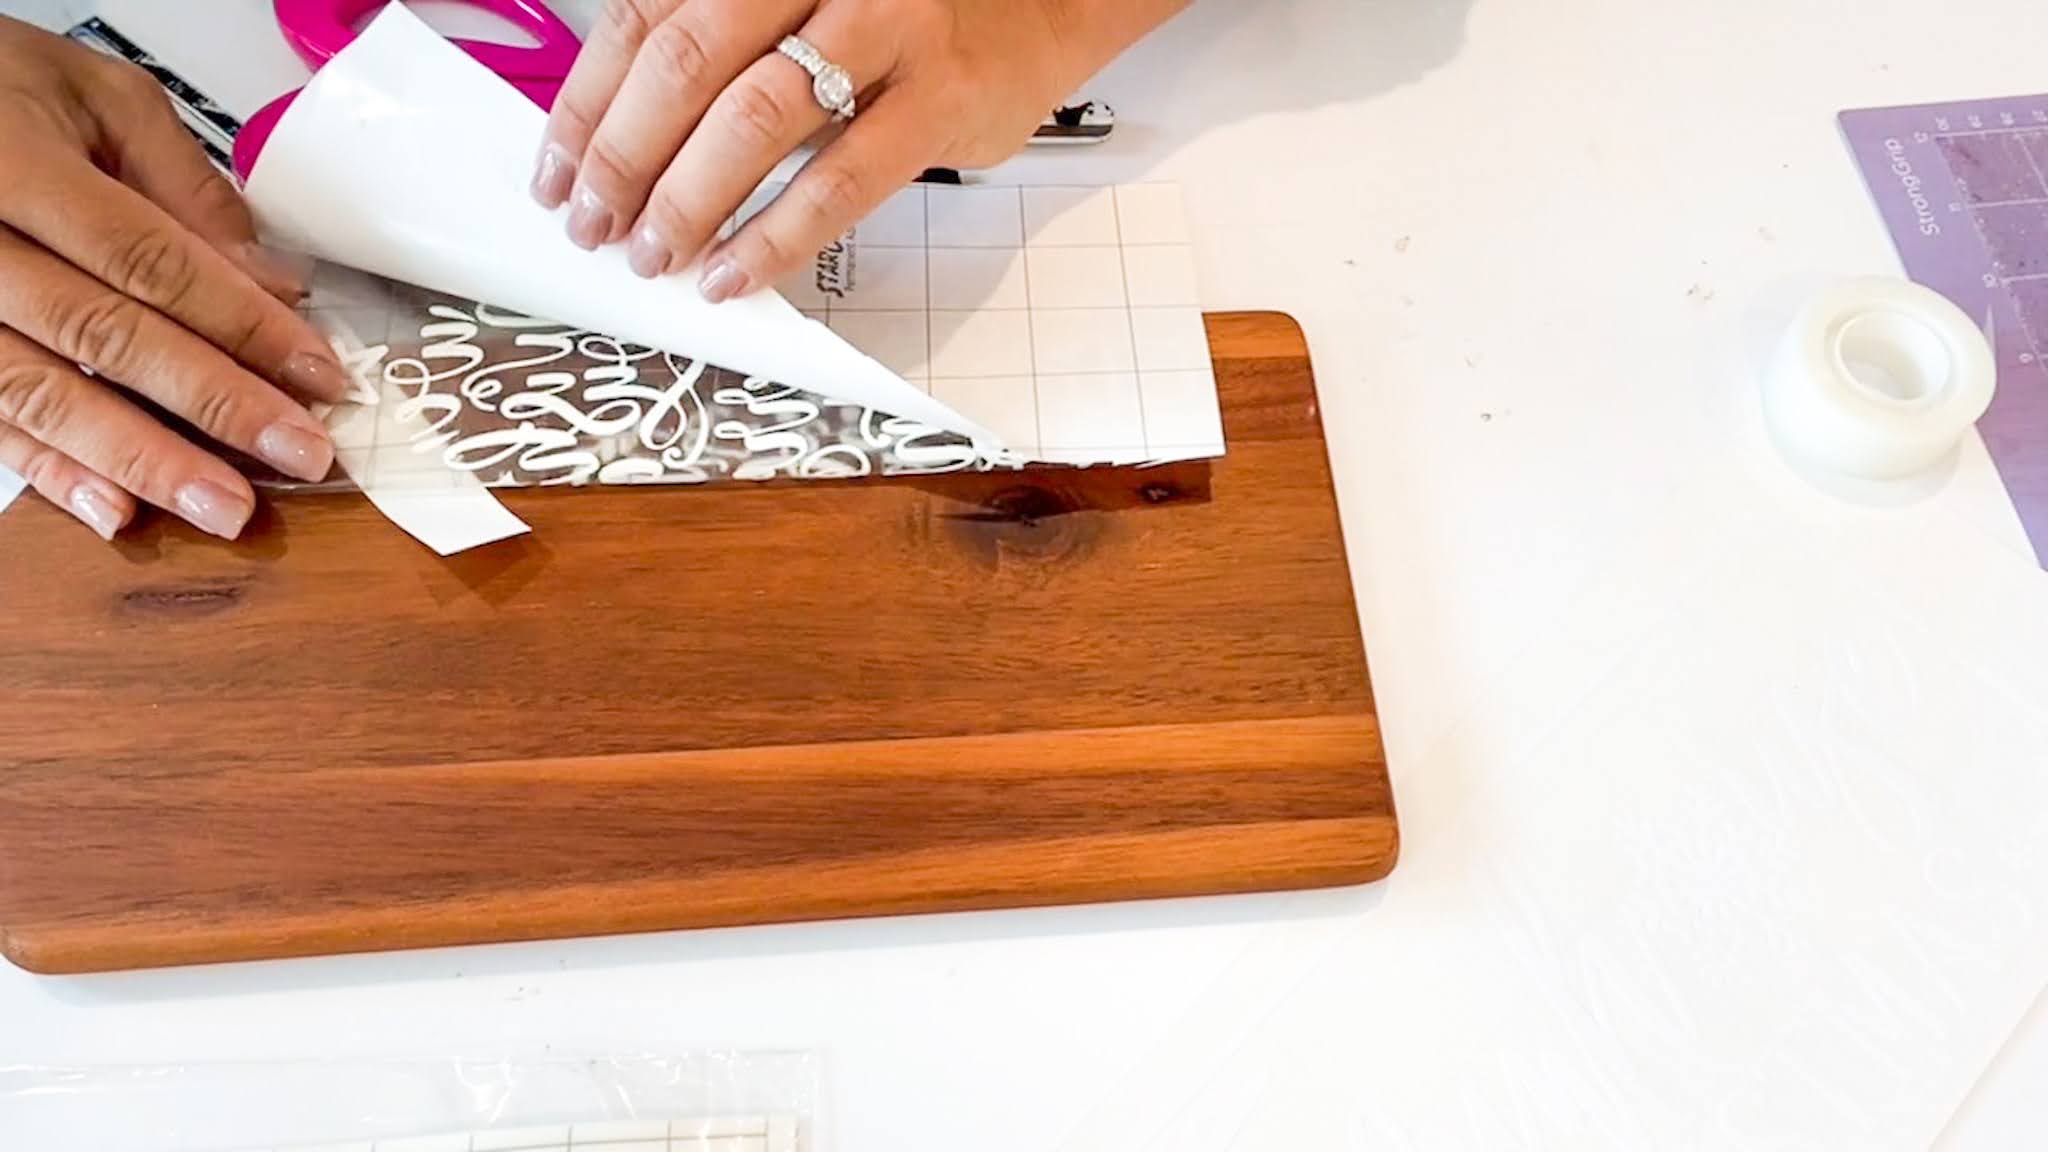 Adhesive Vinyl On A Cutting Board - That You Can Use! - So Fontsy